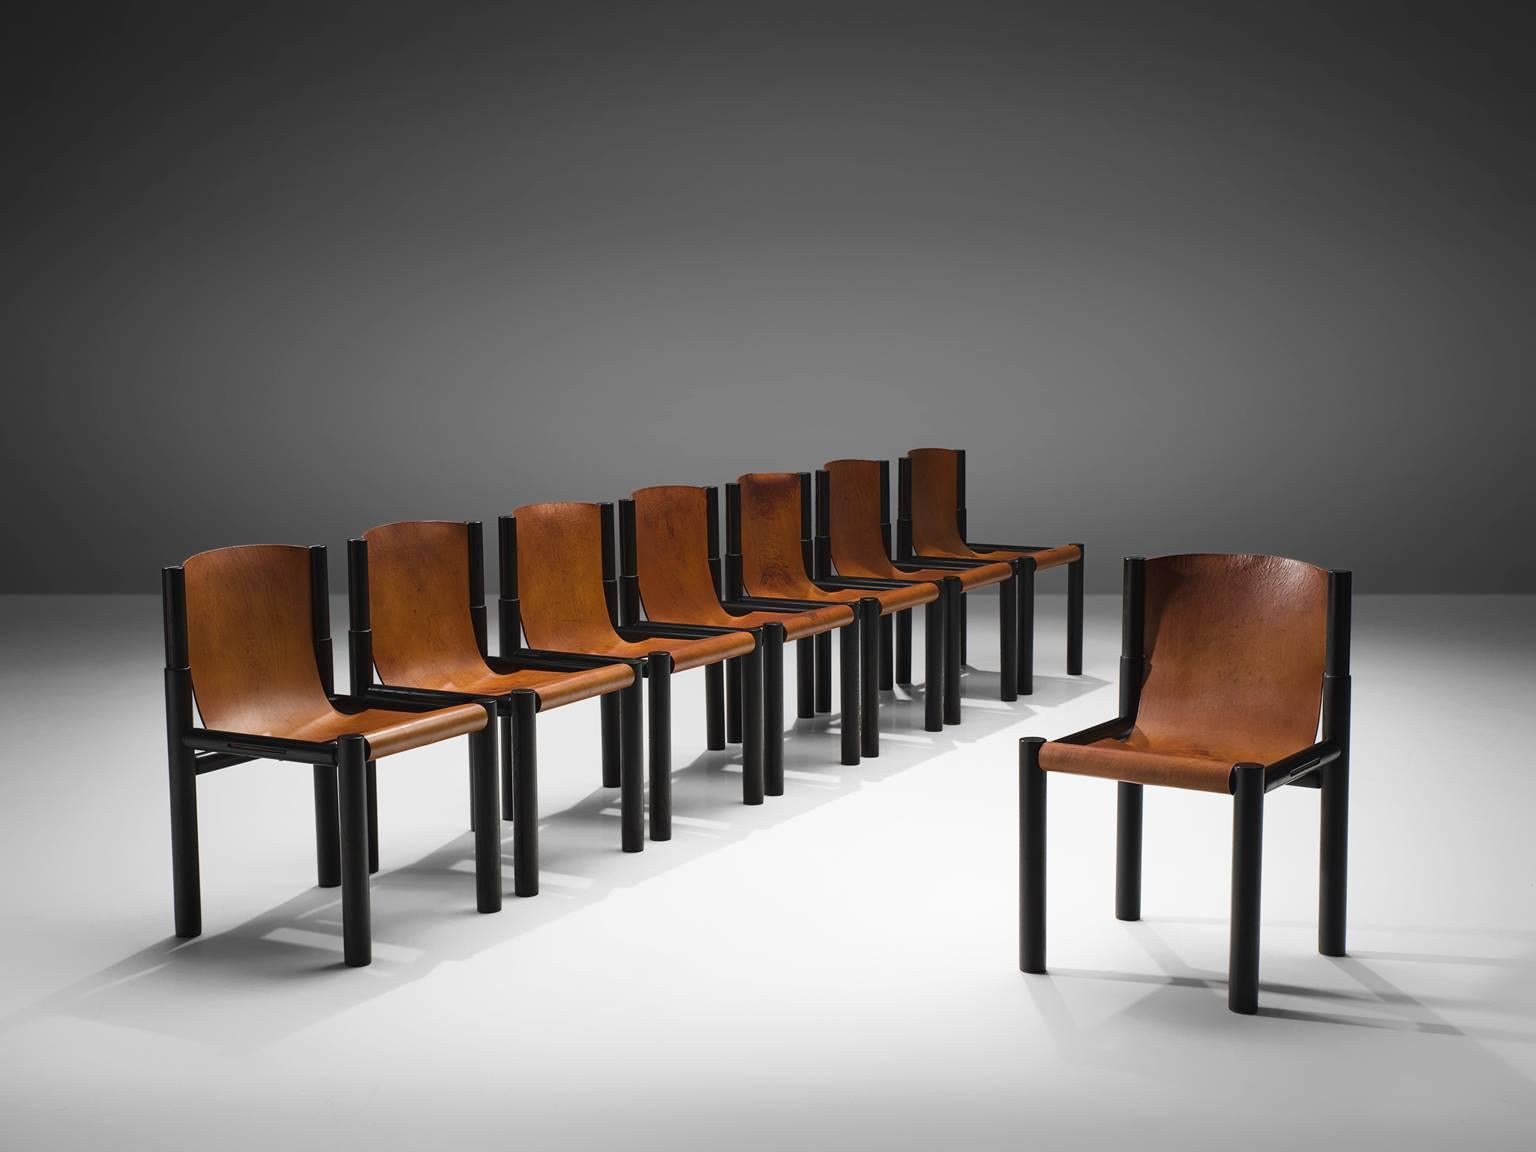 Pia Manu, dining chairs, cognac leather, ebonized wood, Belgium, 1970s 

These robust chairs feature a geometric, sturdy black painted wooden frame. They are executed with fine cognac leather that has patinated over time. The leather of the seat